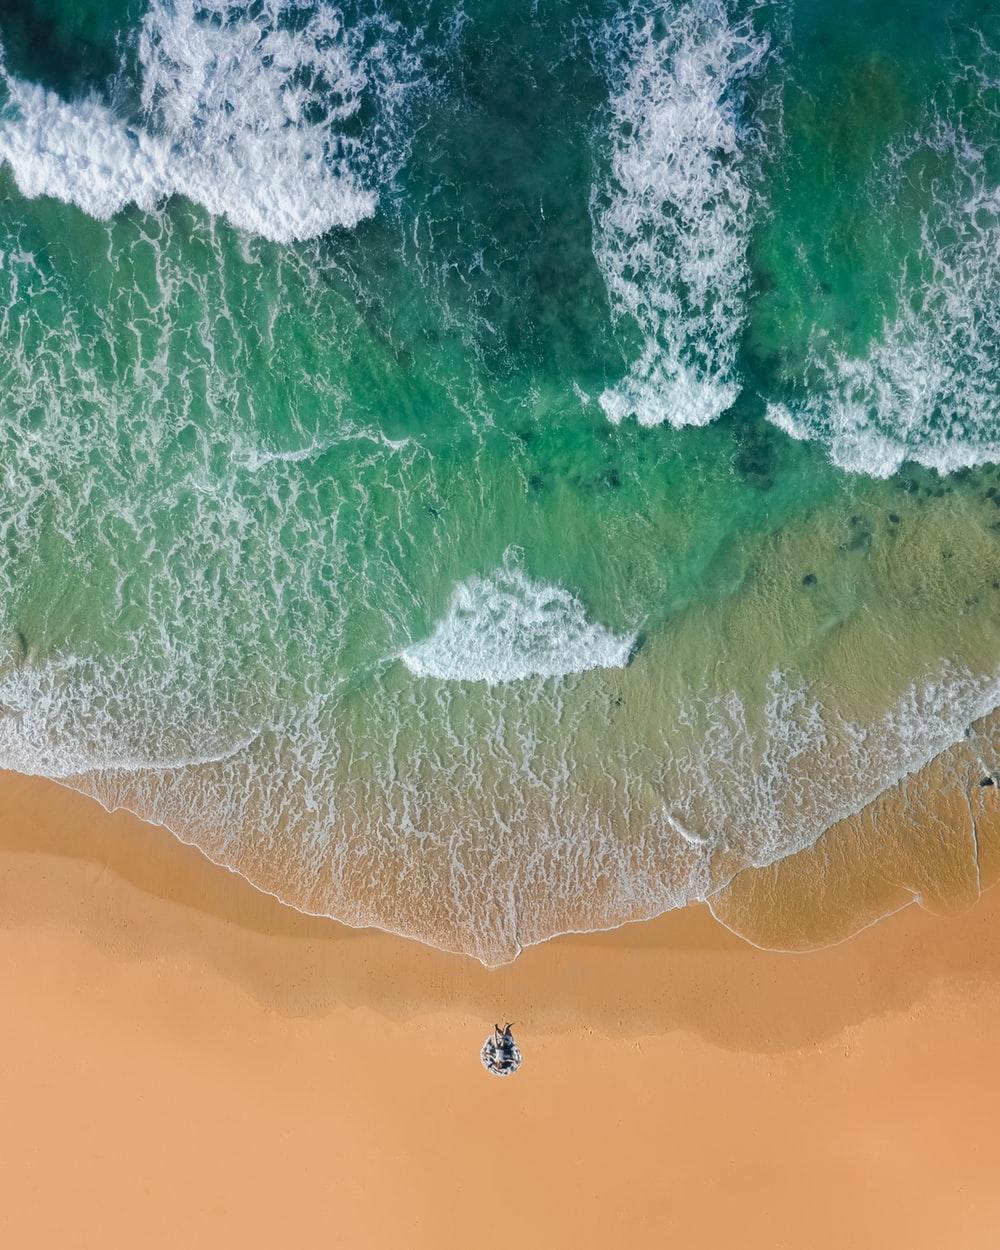 Beach Drone Picture. Download Free Image &